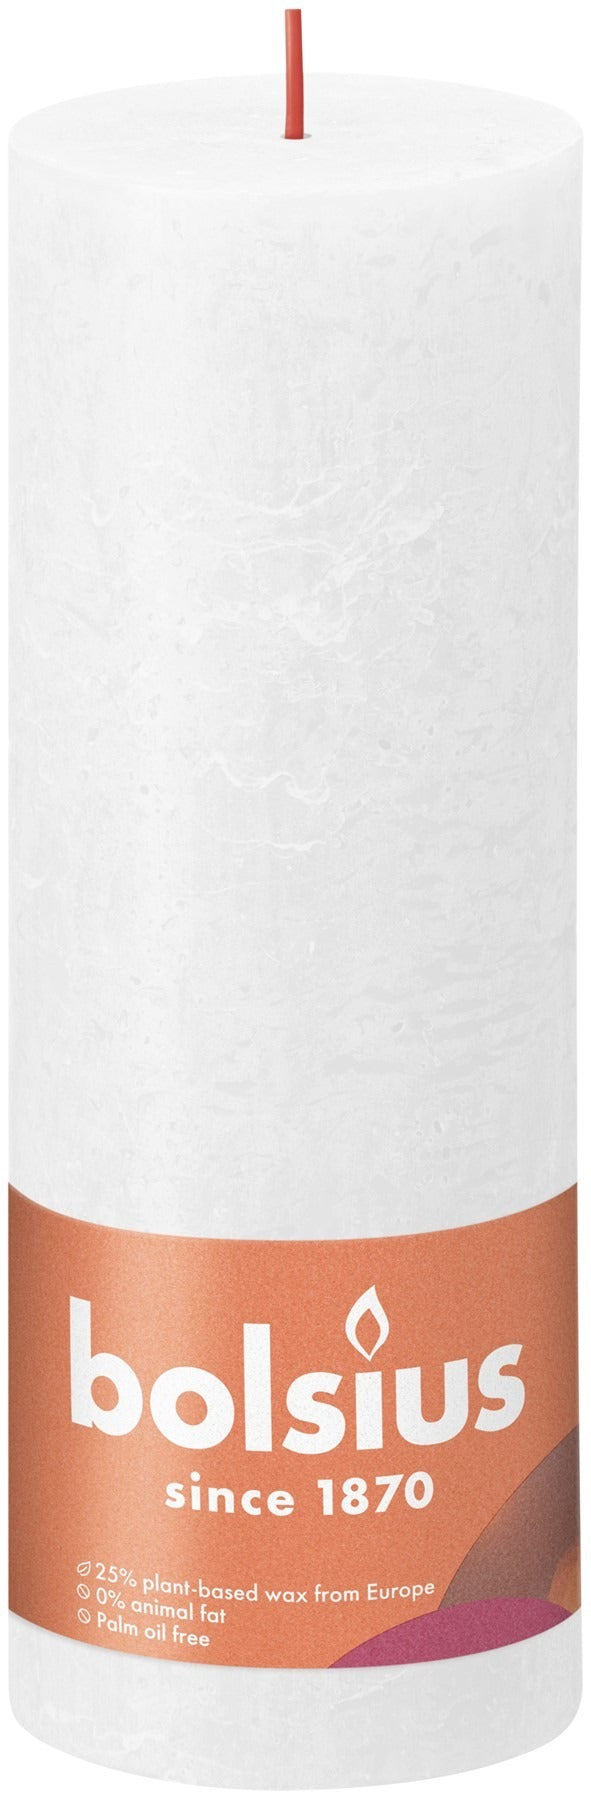 View Cloudy White Bolsius Rustic Shine Pillar Candle 190 x 68mm information